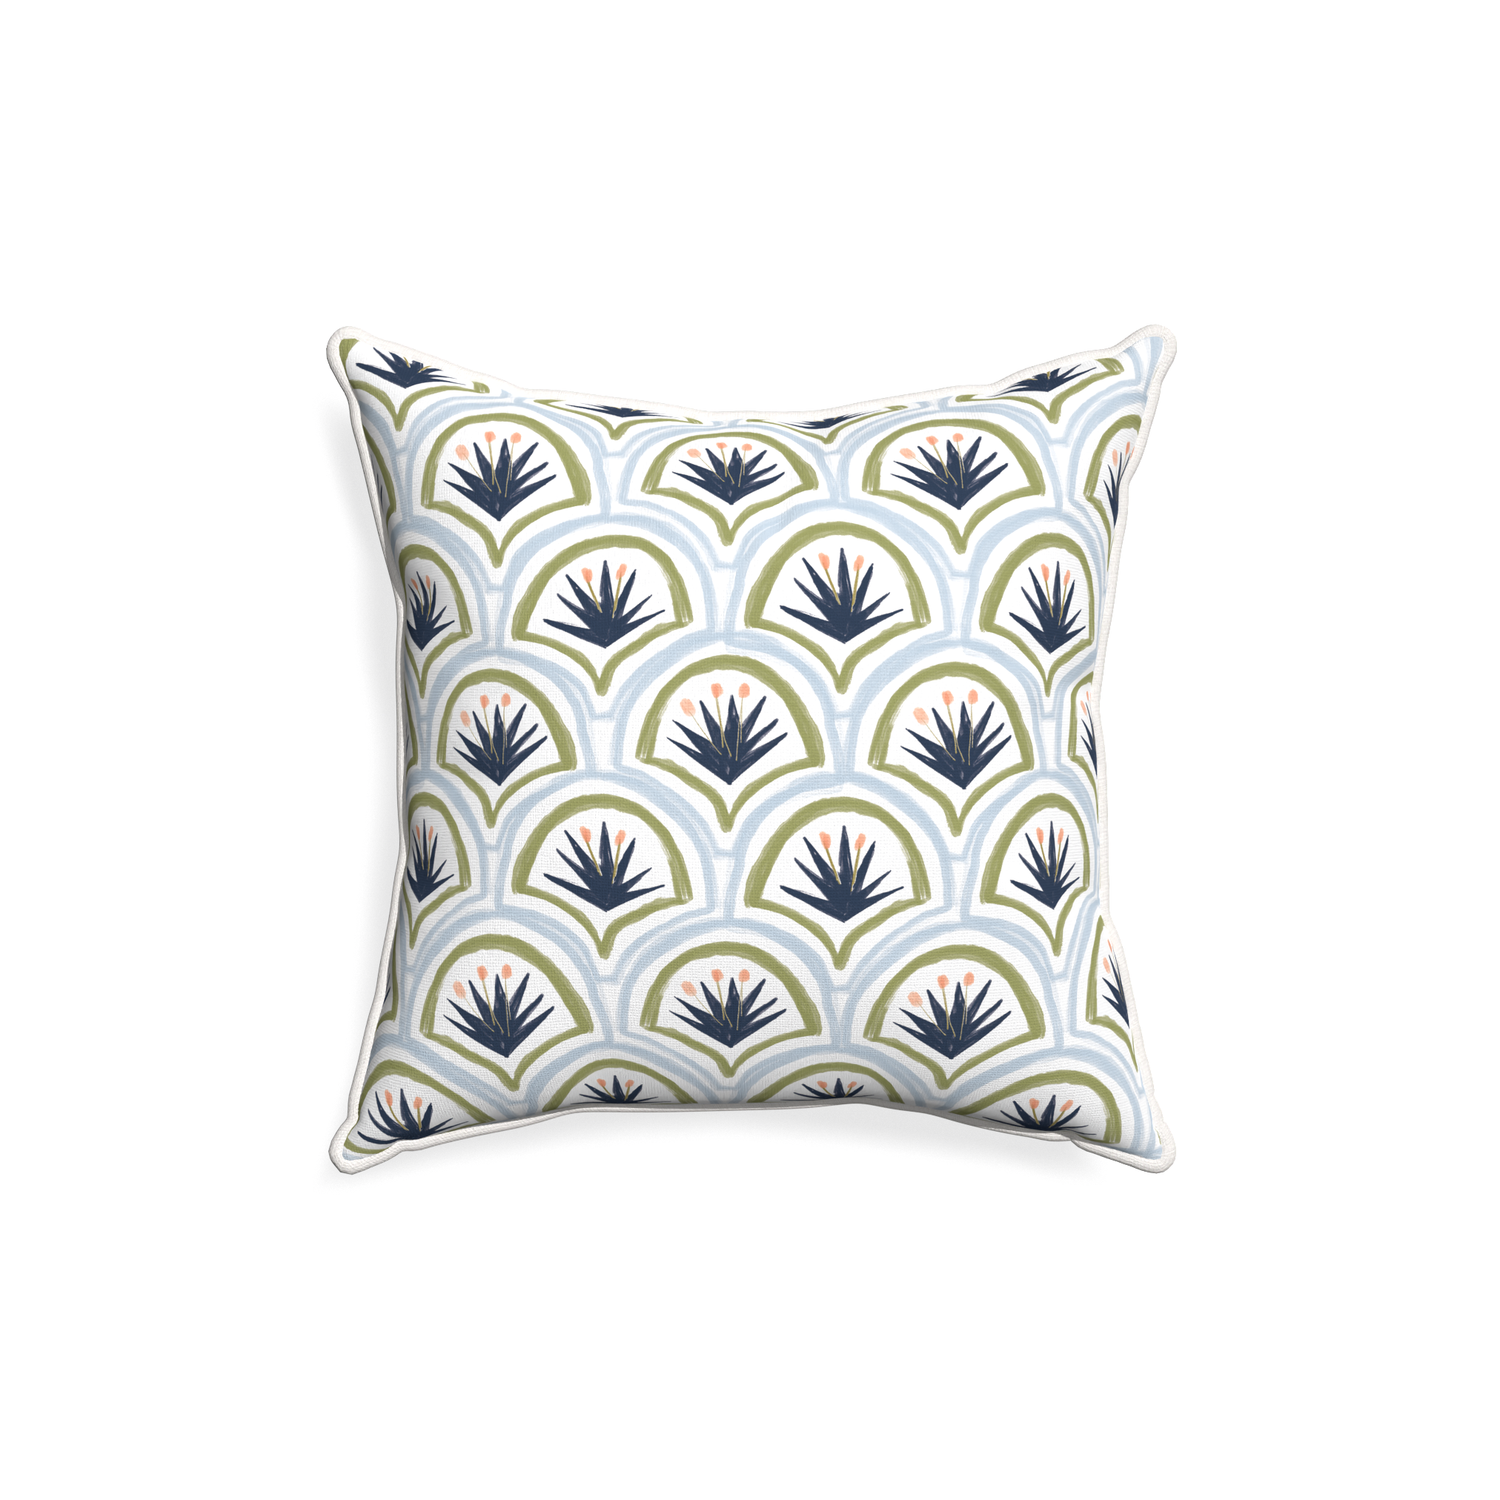 18-square thatcher midnight custom art deco palm patternpillow with snow piping on white background